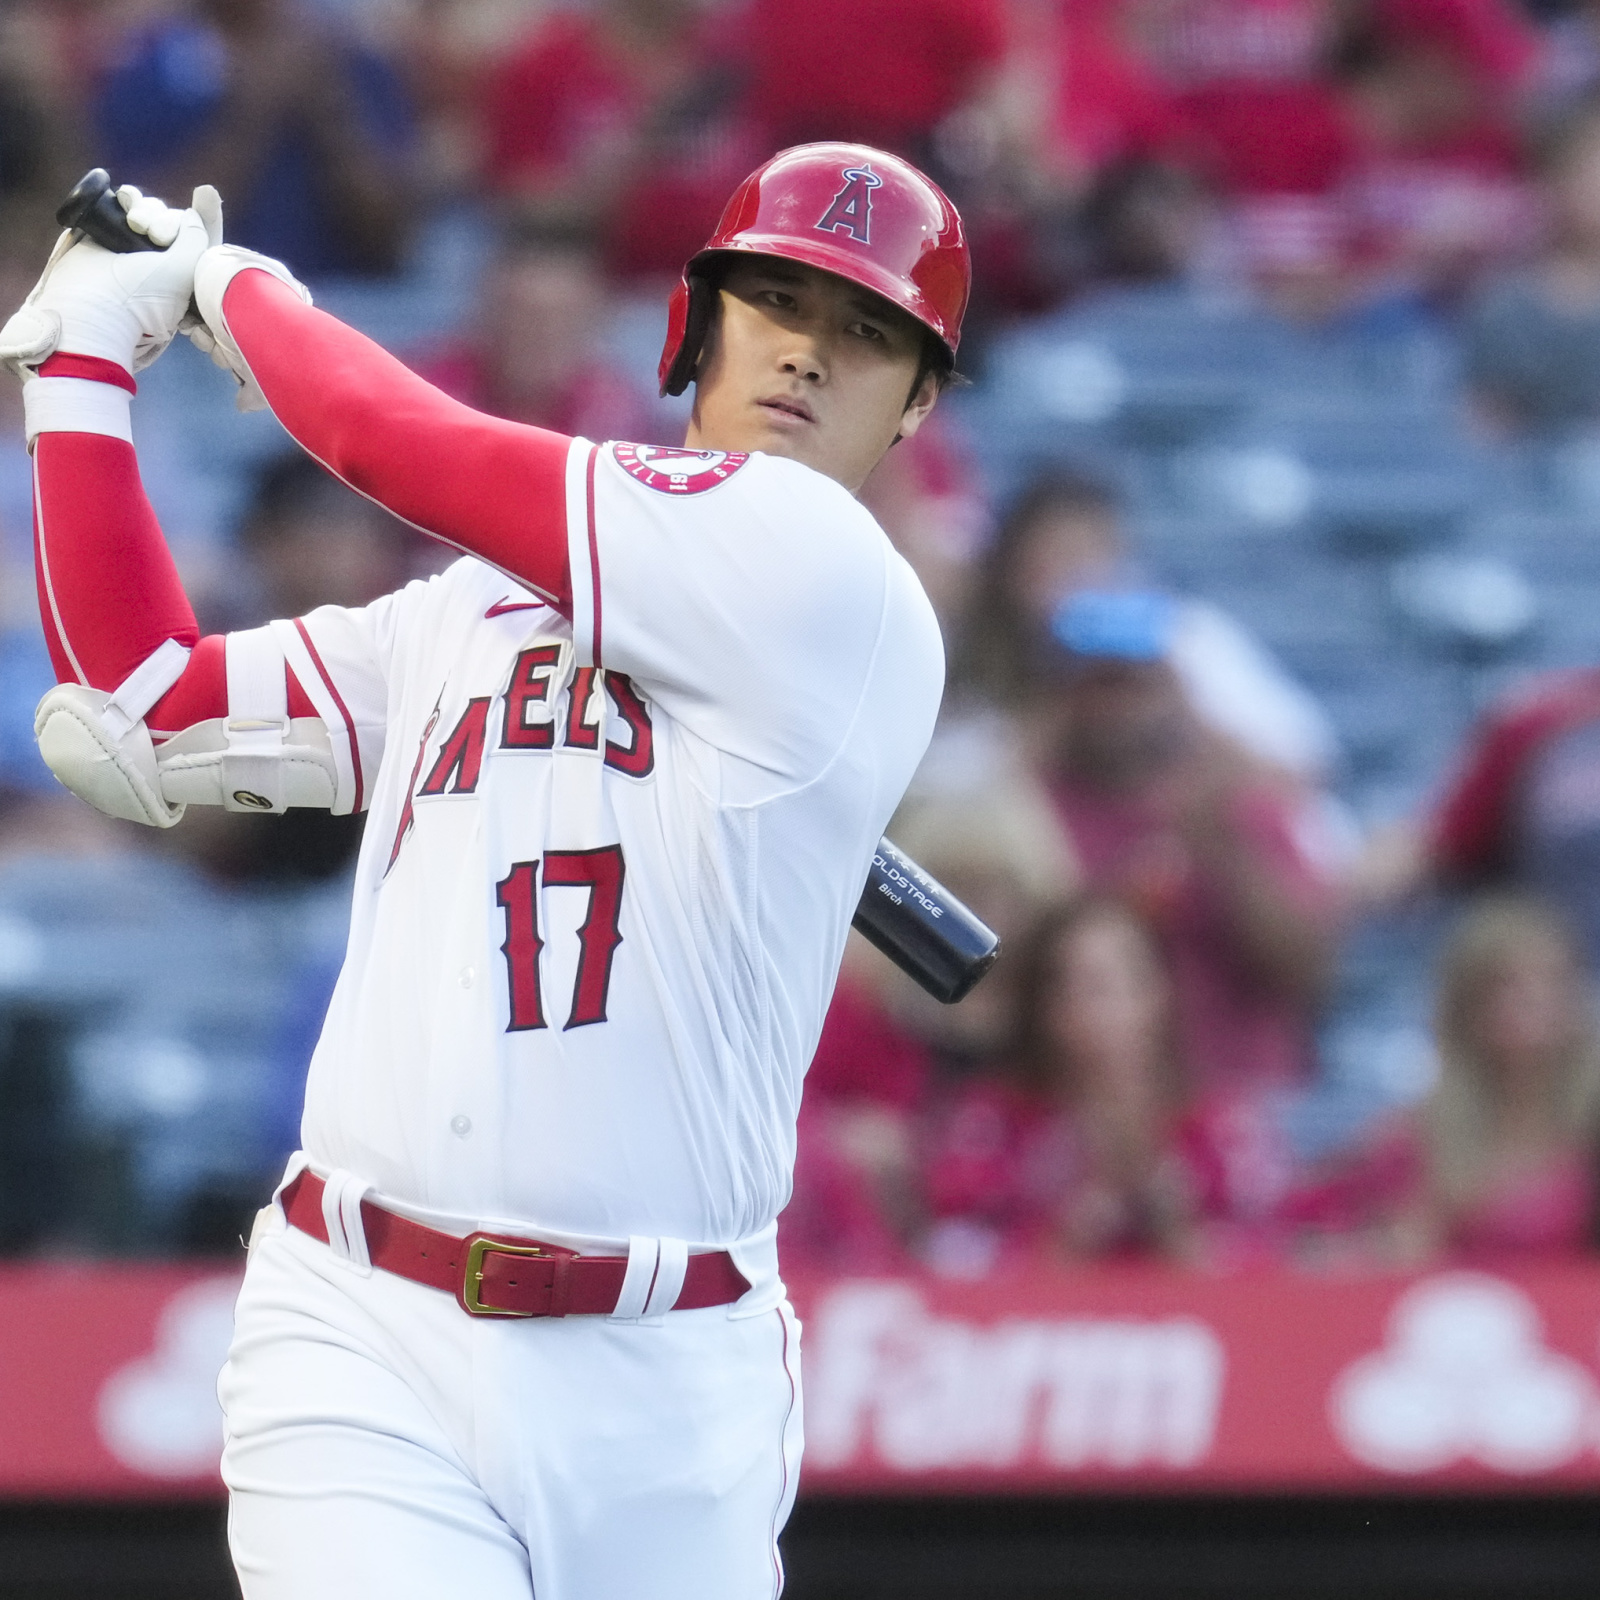 Angels' Shohei Ohtani batting as designated hitter vs Mets after